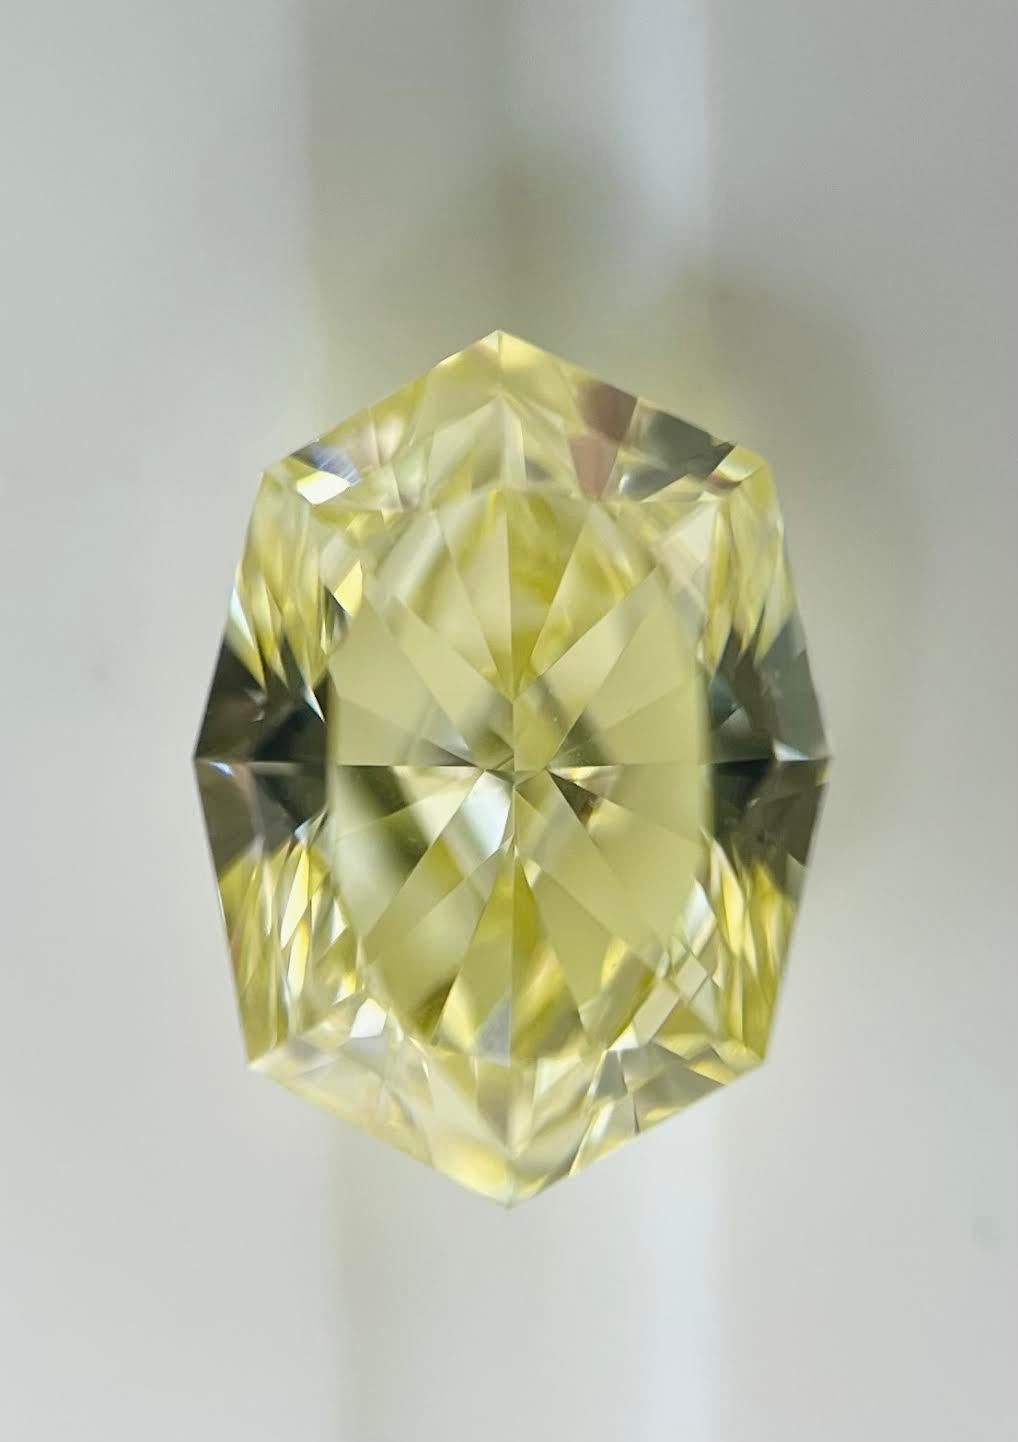 Octagon Cut GIA Certified Octagonal 1.54 Carat Natural Loose Fancy Yellow VS1 Diamond For Sale